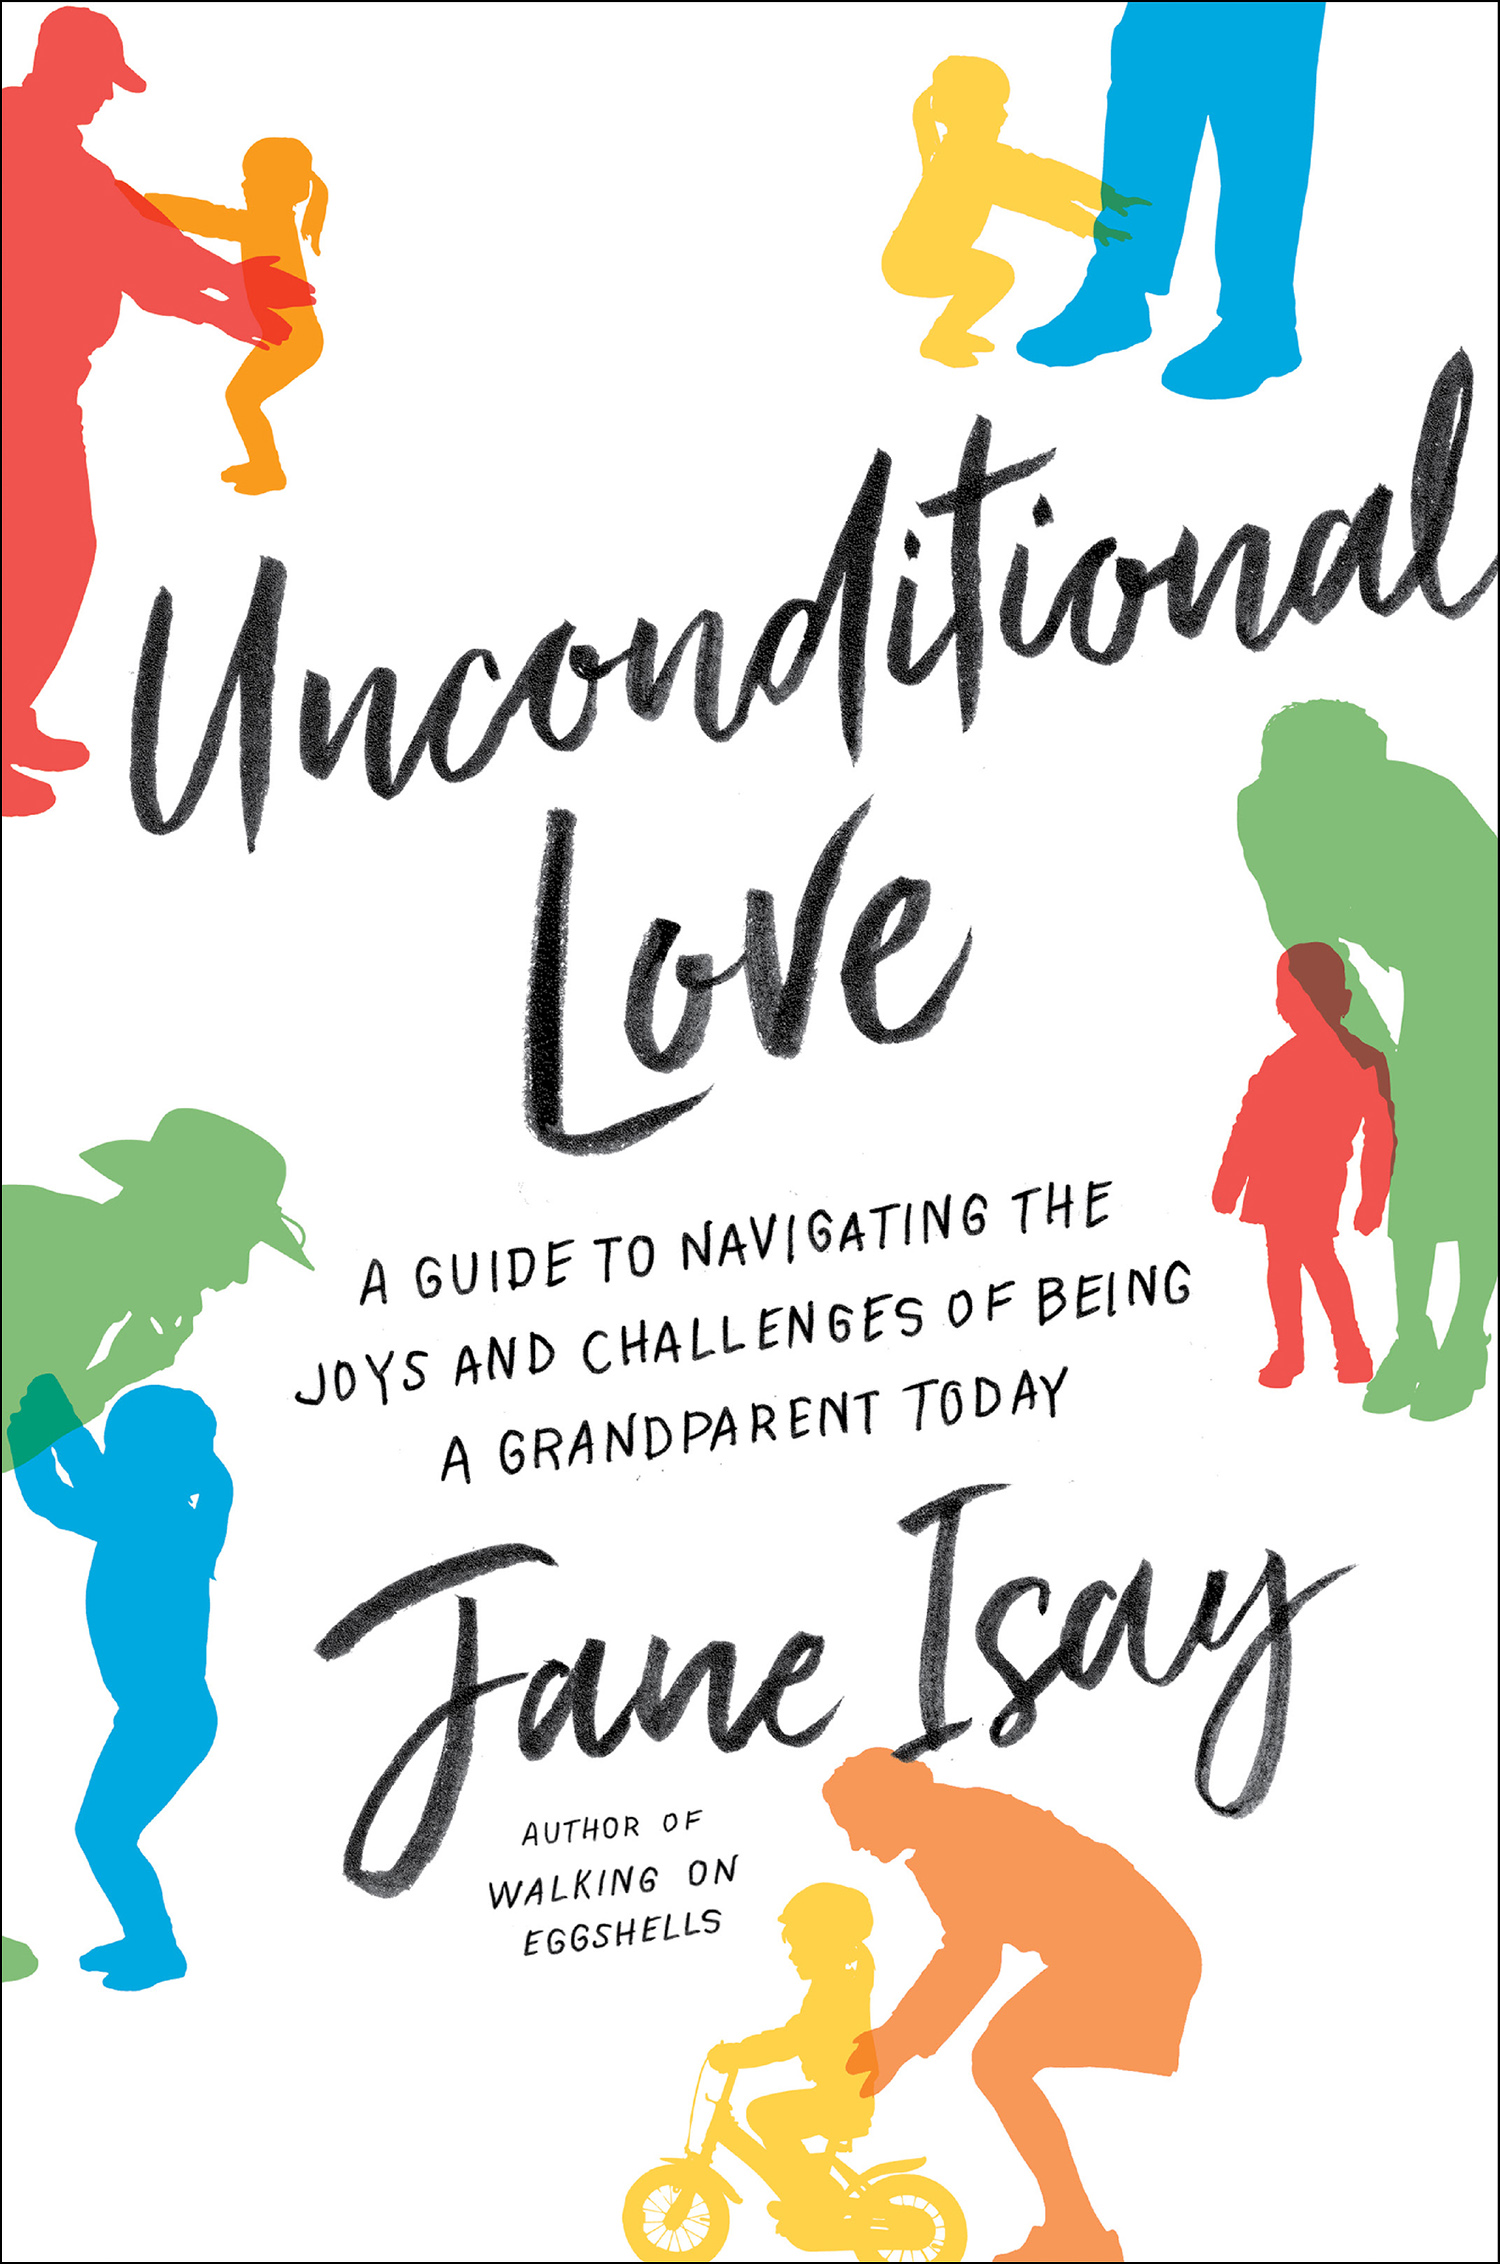 Umschlagbild für Unconditional Love [electronic resource] : A Guide to Navigating the Joys and Challenges of Being a Grandparent Today